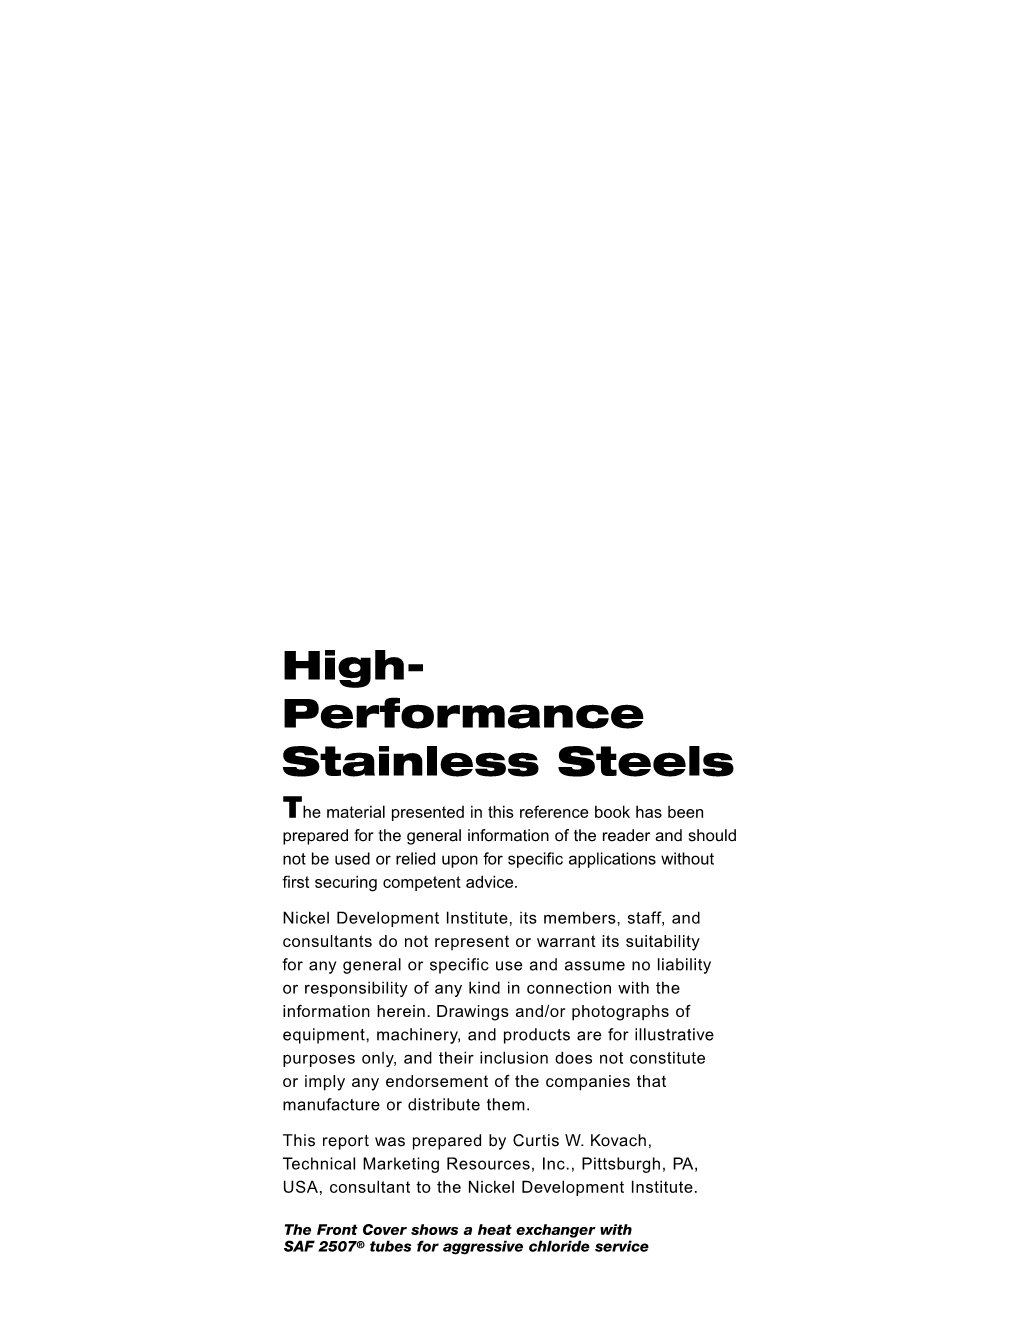 High- Performance Stainless Steels